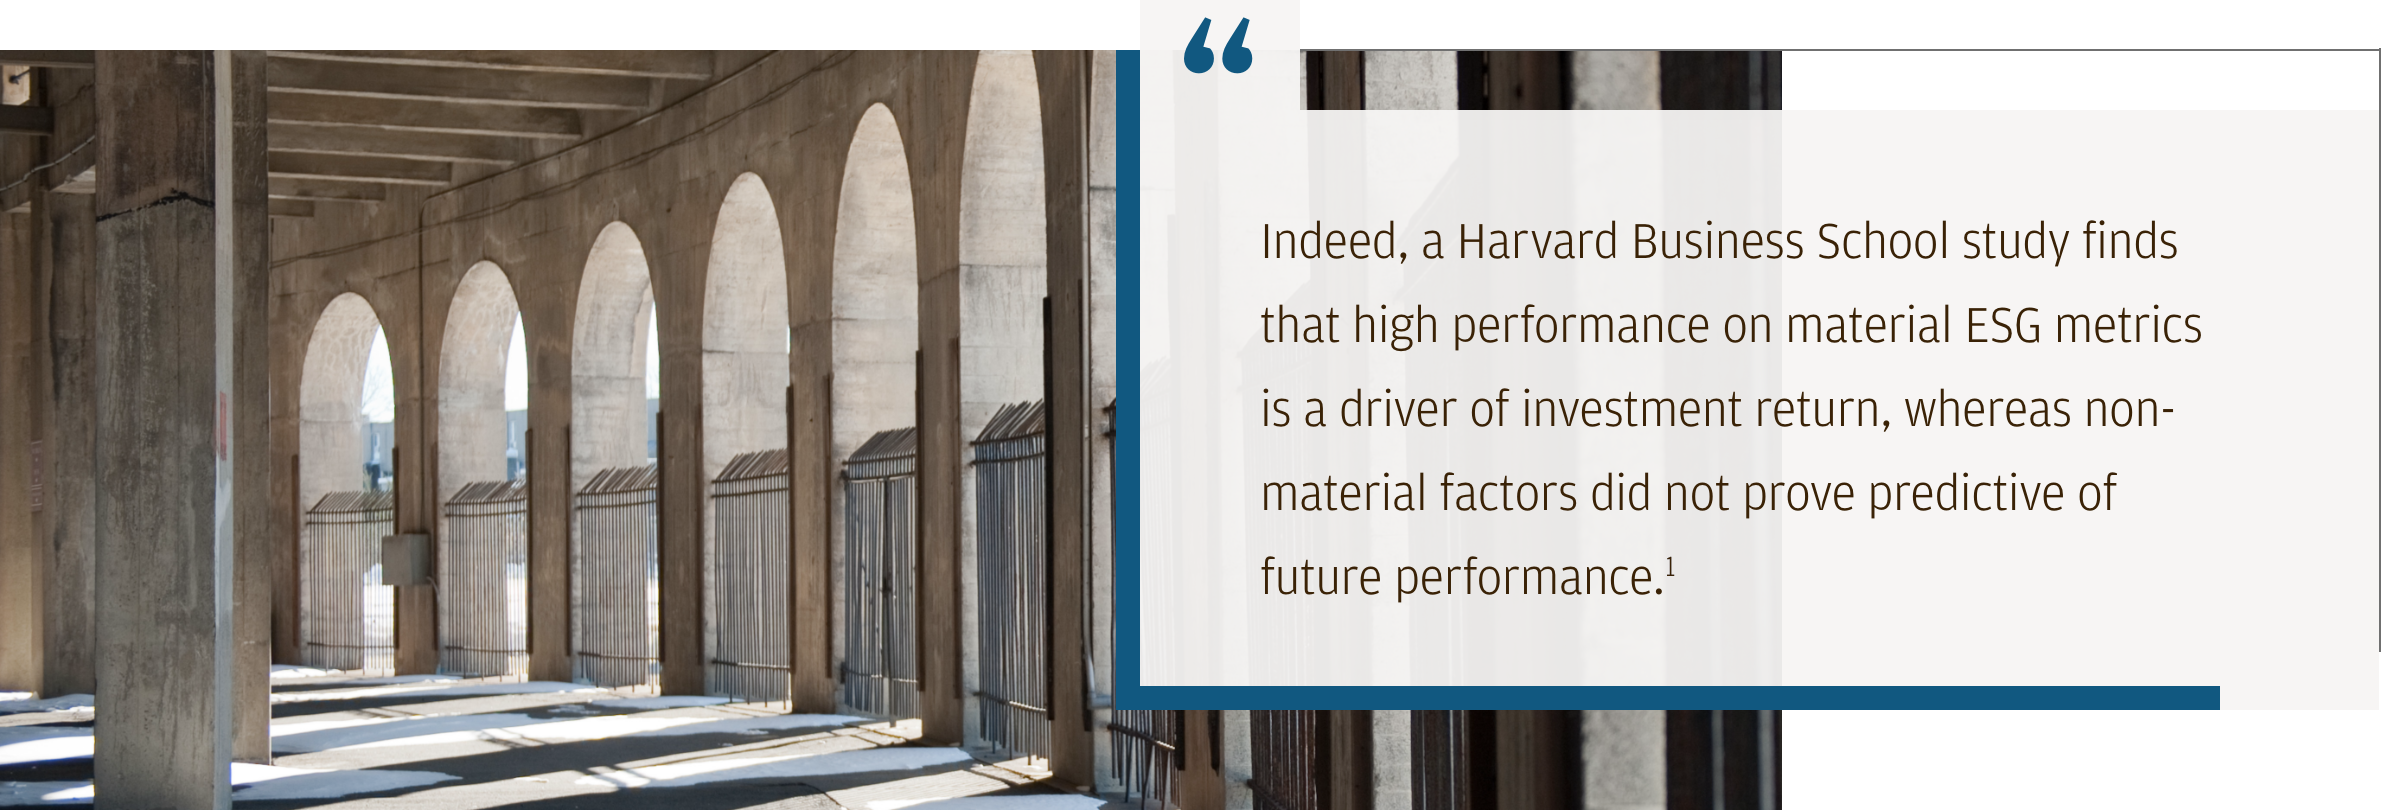 Overlaid on an image of cement archways at Harvard Stadium in Allston, Mass., a quote box reads: Indeed, a Harvard Business School study finds that high-performance on material ESG metrics is a driver of investment return, whereas non-material factors did not prove predictive of future performance.